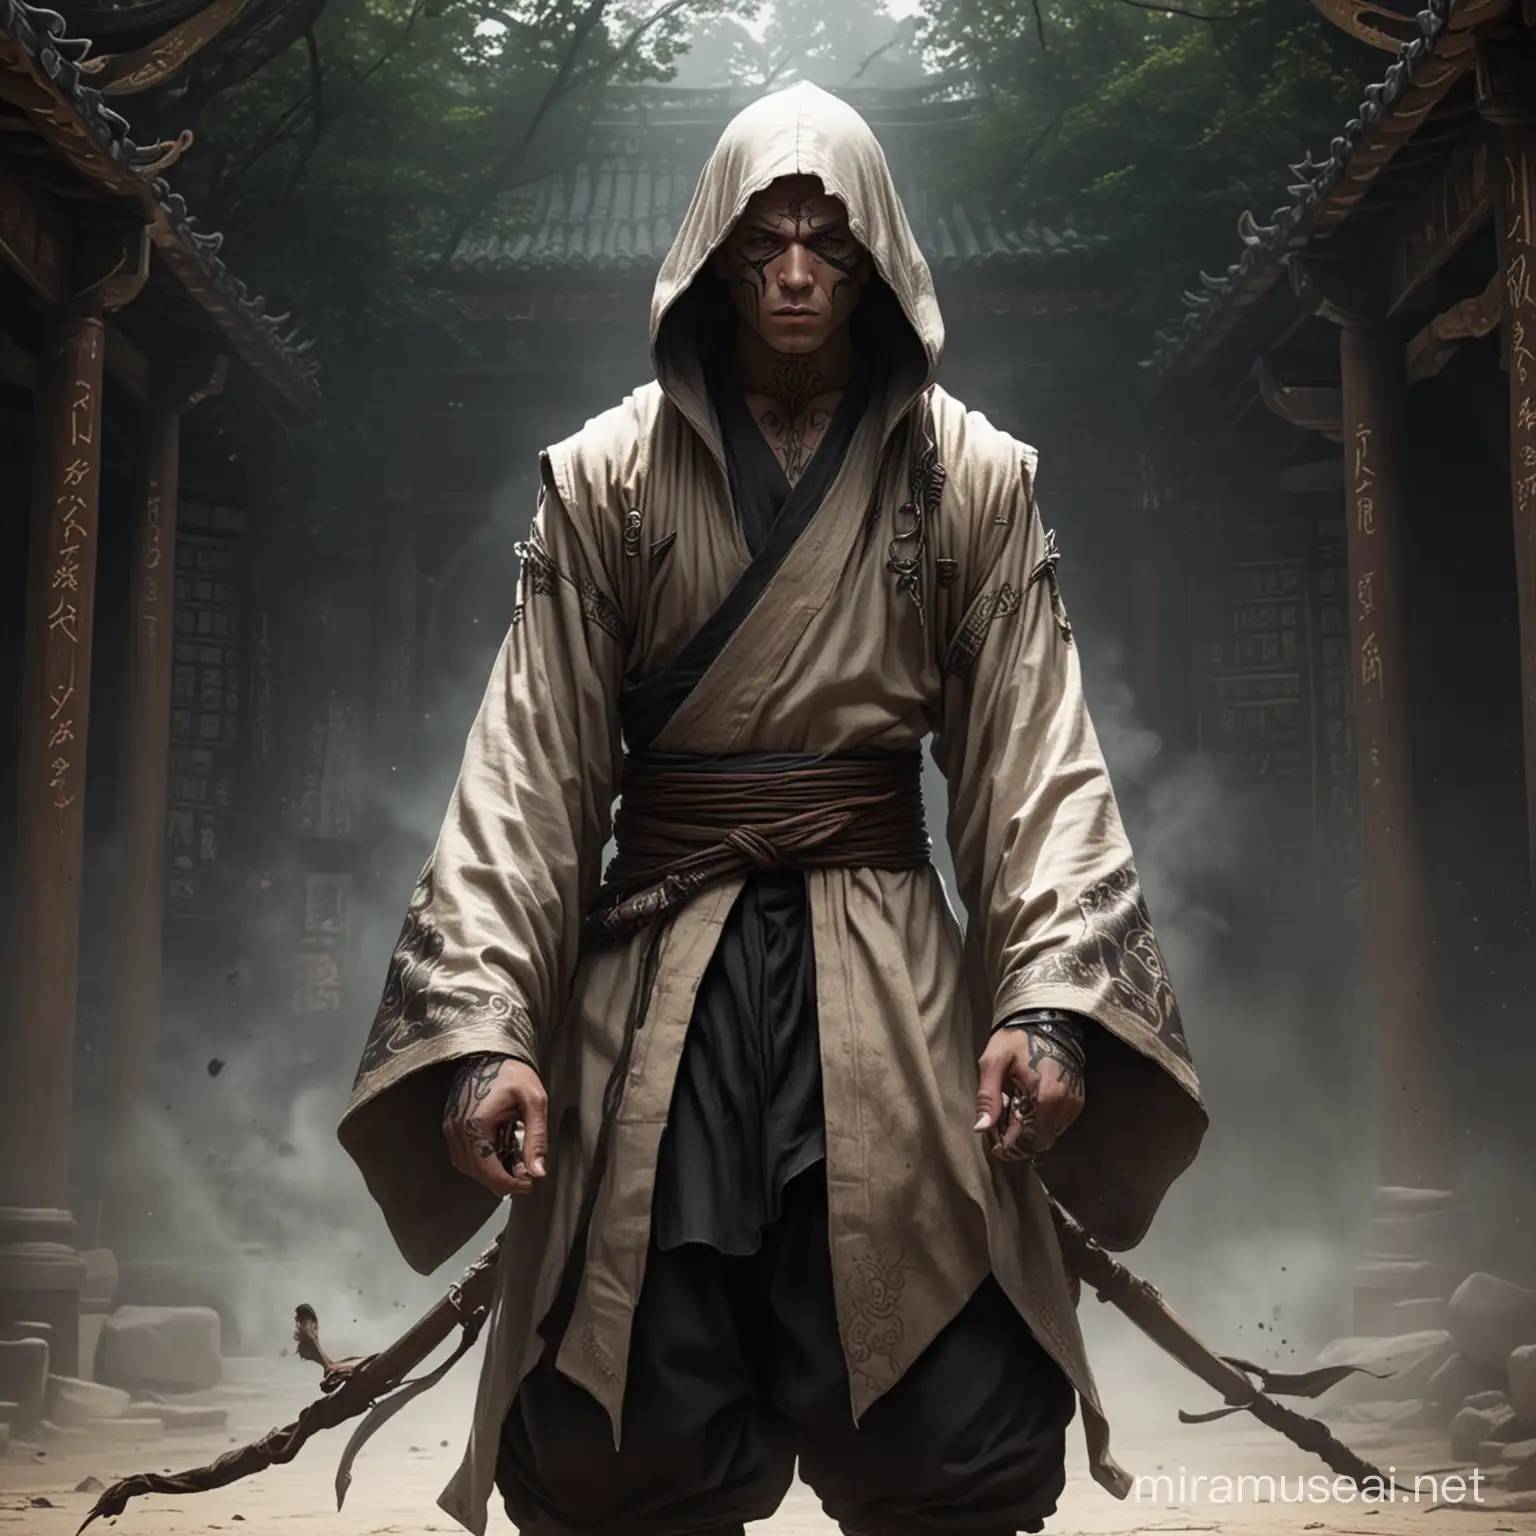 half-elf, light skinned monk in hooded robes, shaved head with tattoos, deep swirling shadows surround him, wearing a ninja mask